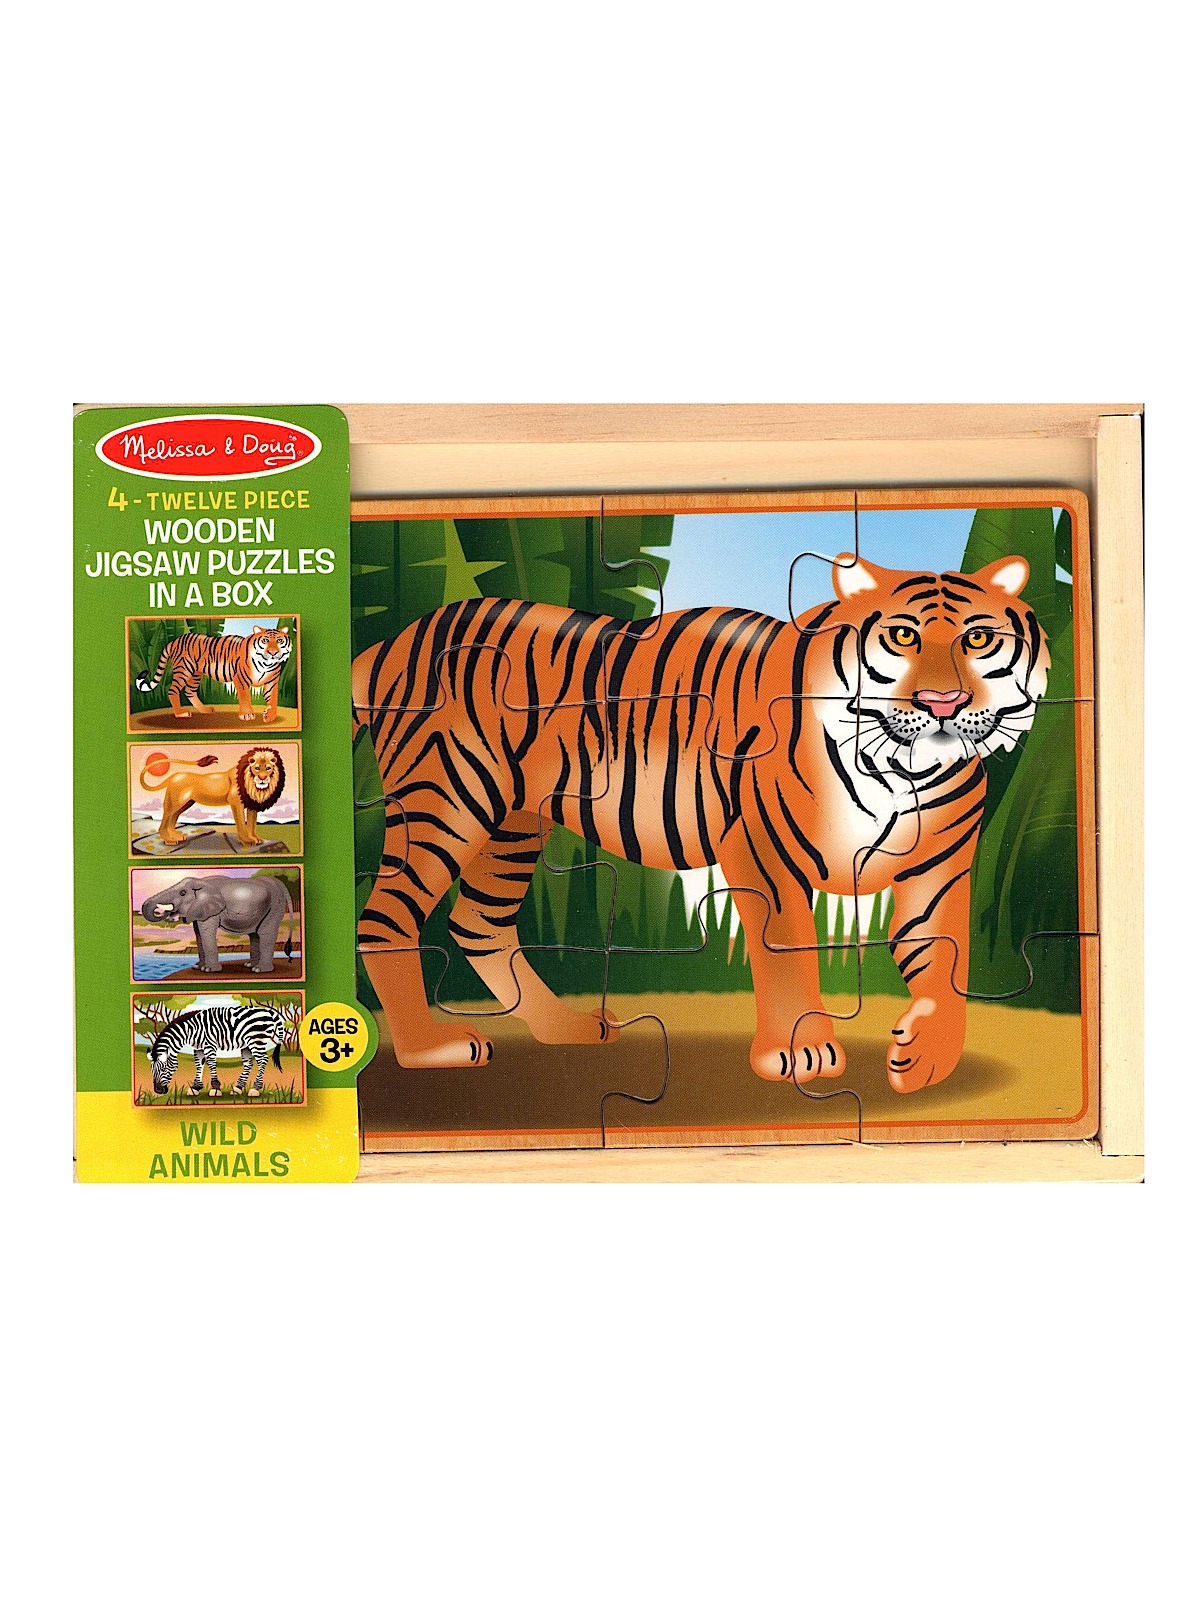 Wooden Puzzles In A Box Wild Animals 4 Puzzles, 12 Pieces Each